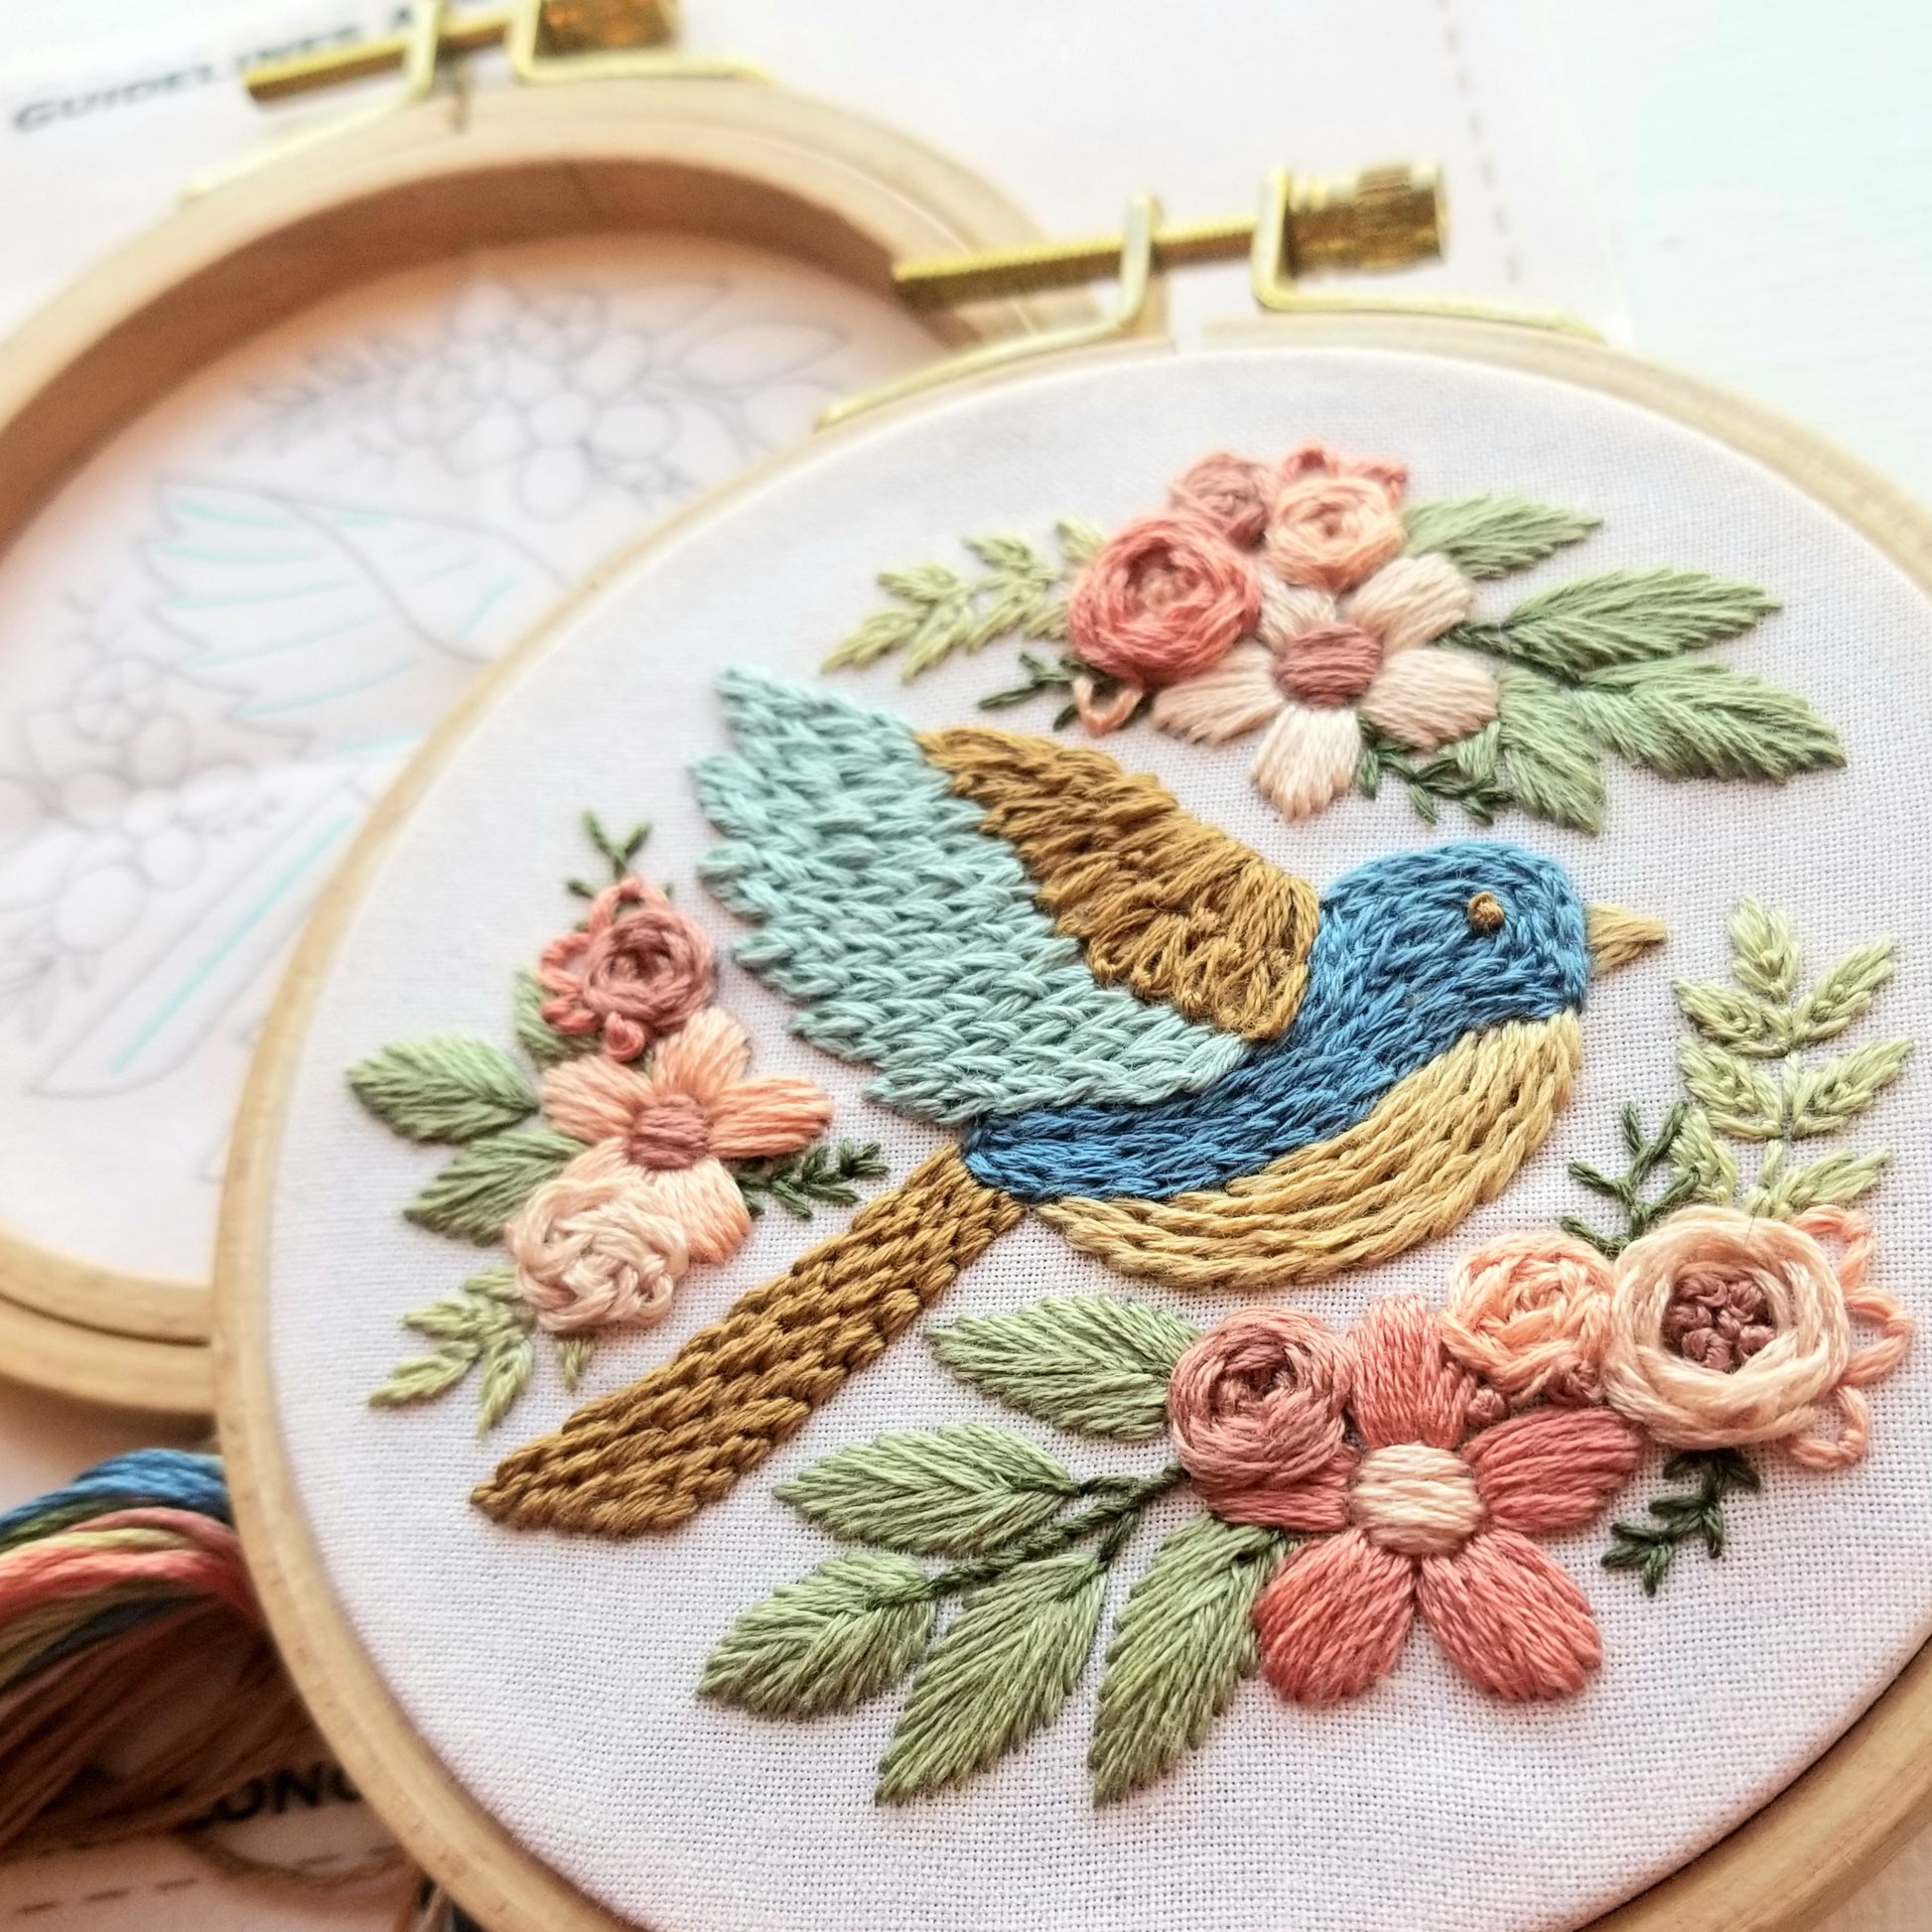 Bluebird Slow Stitching Kit, Beginners Embroidery, Easy Sewing